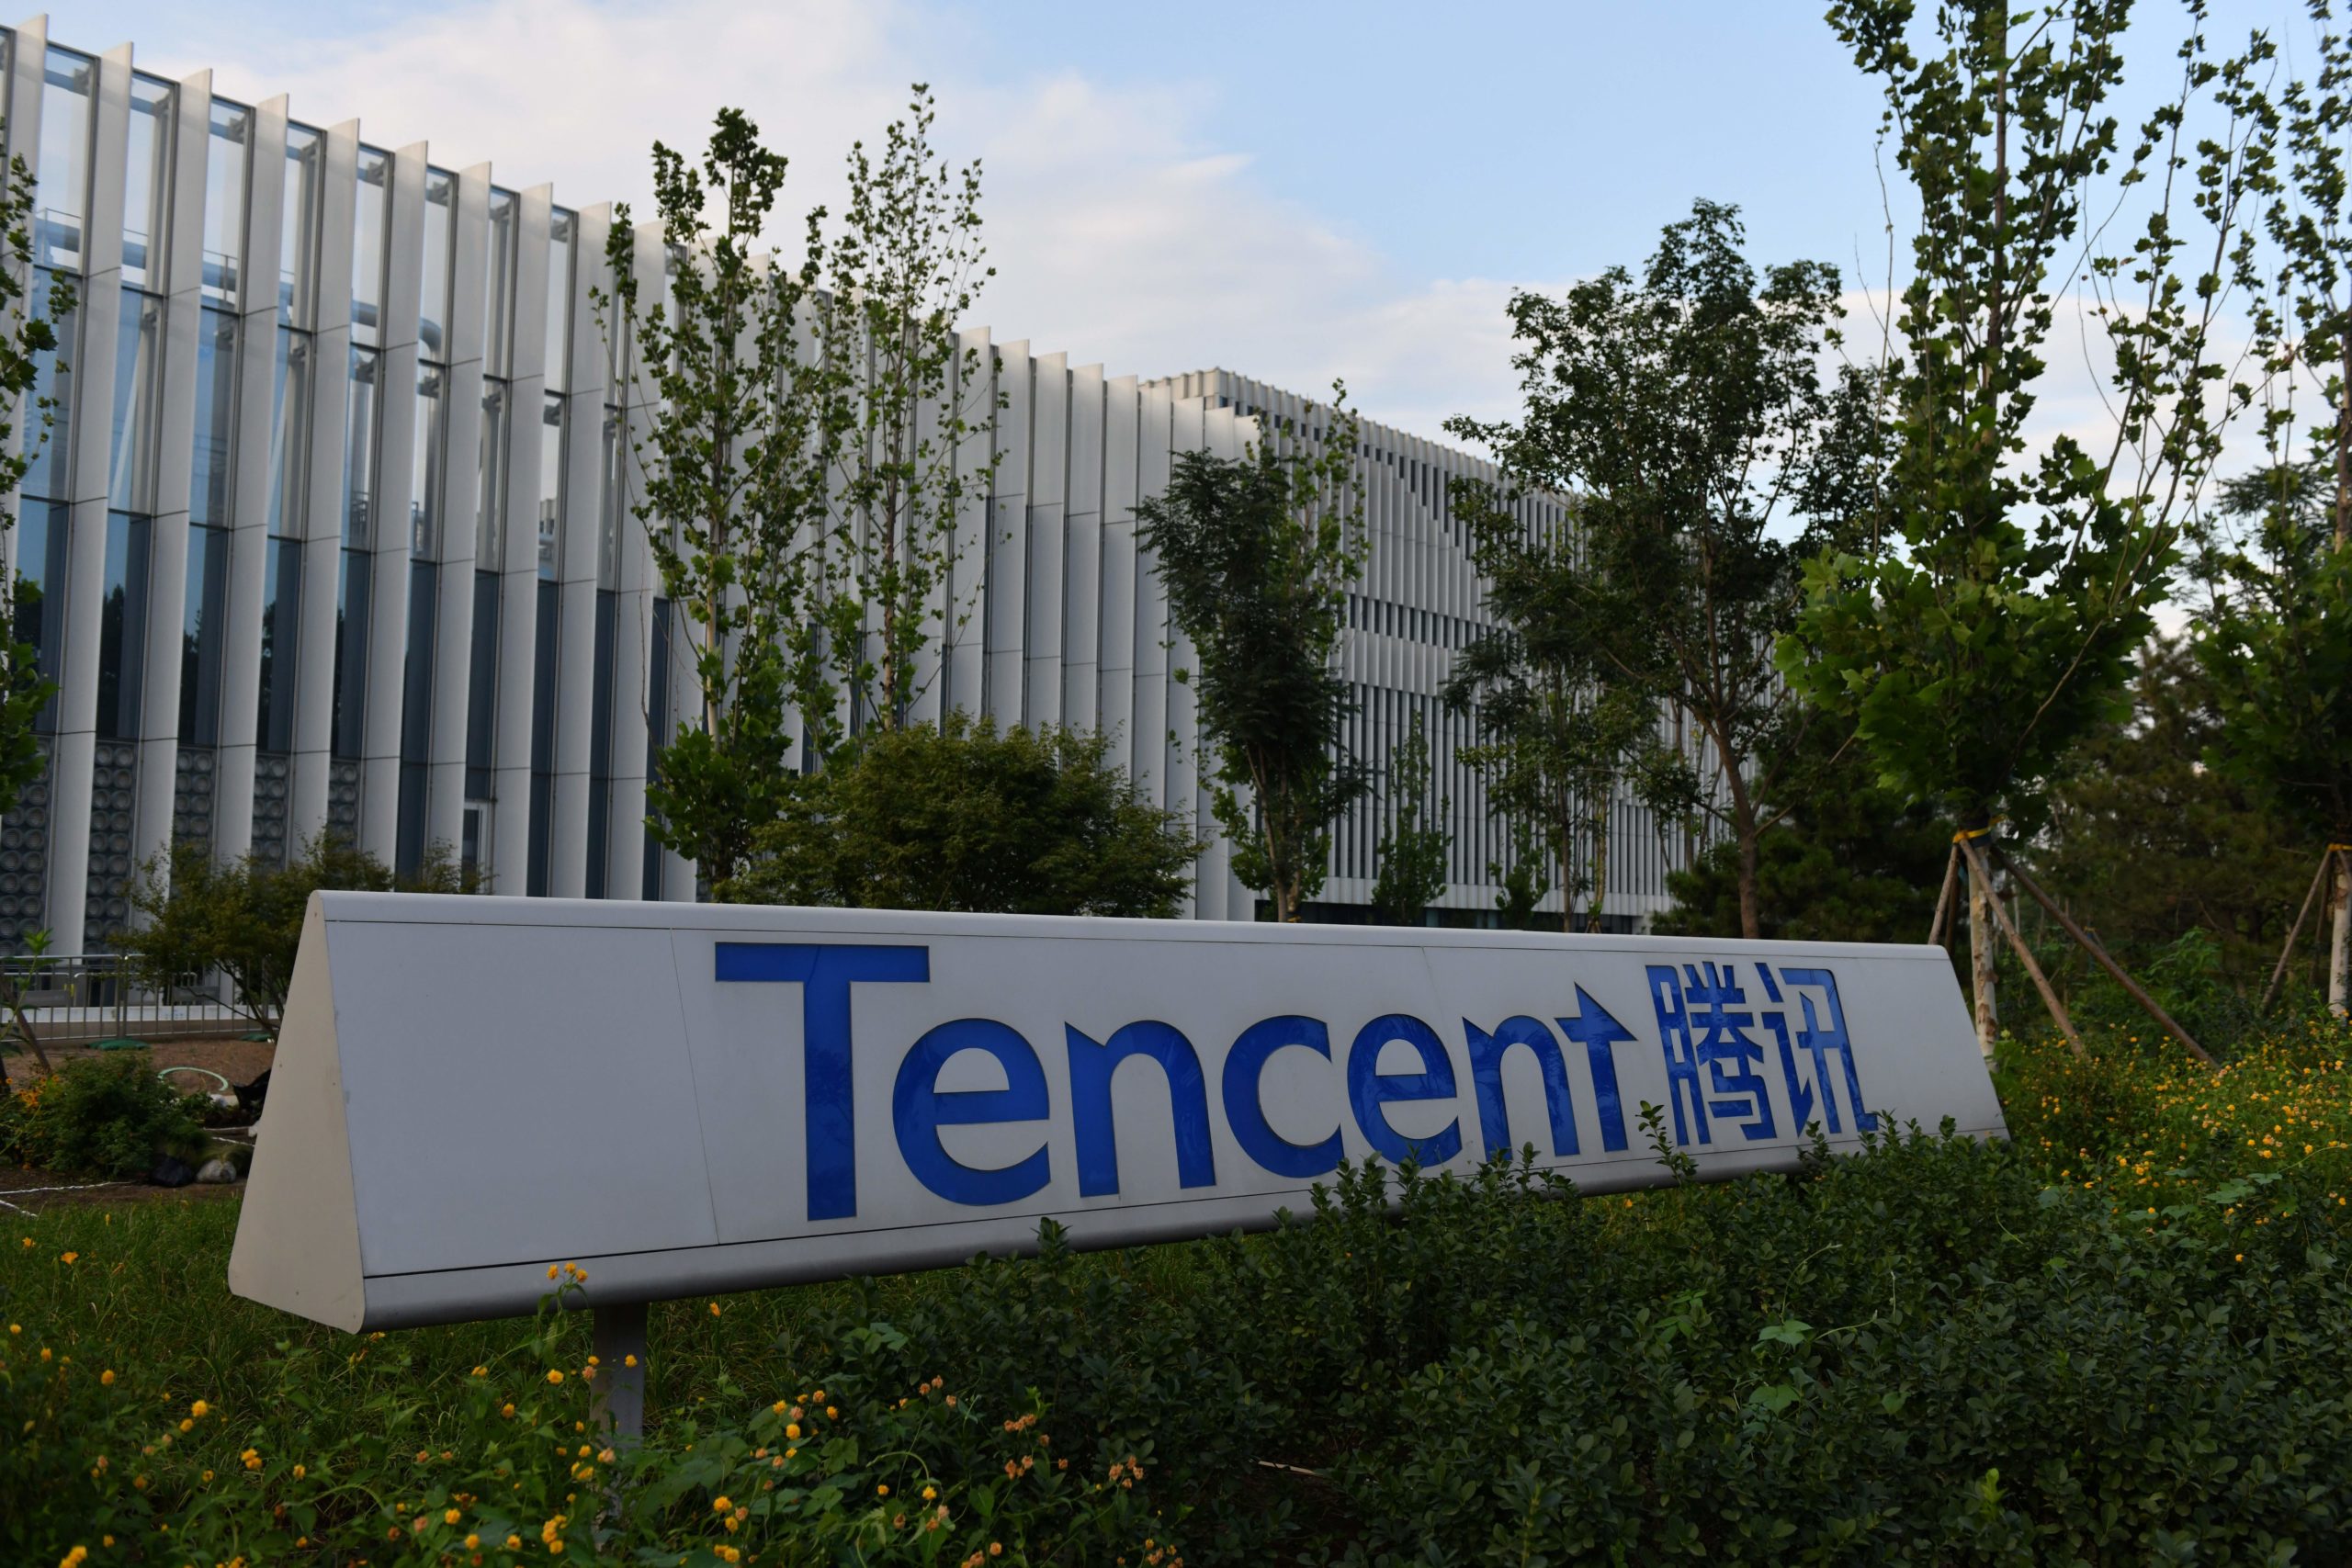 The headquarters of Tencent, the parent company of Chinese social media company WeChat, are seen in Beijing on August 7, 2020. (Greg Baker/AFP via Getty Images)